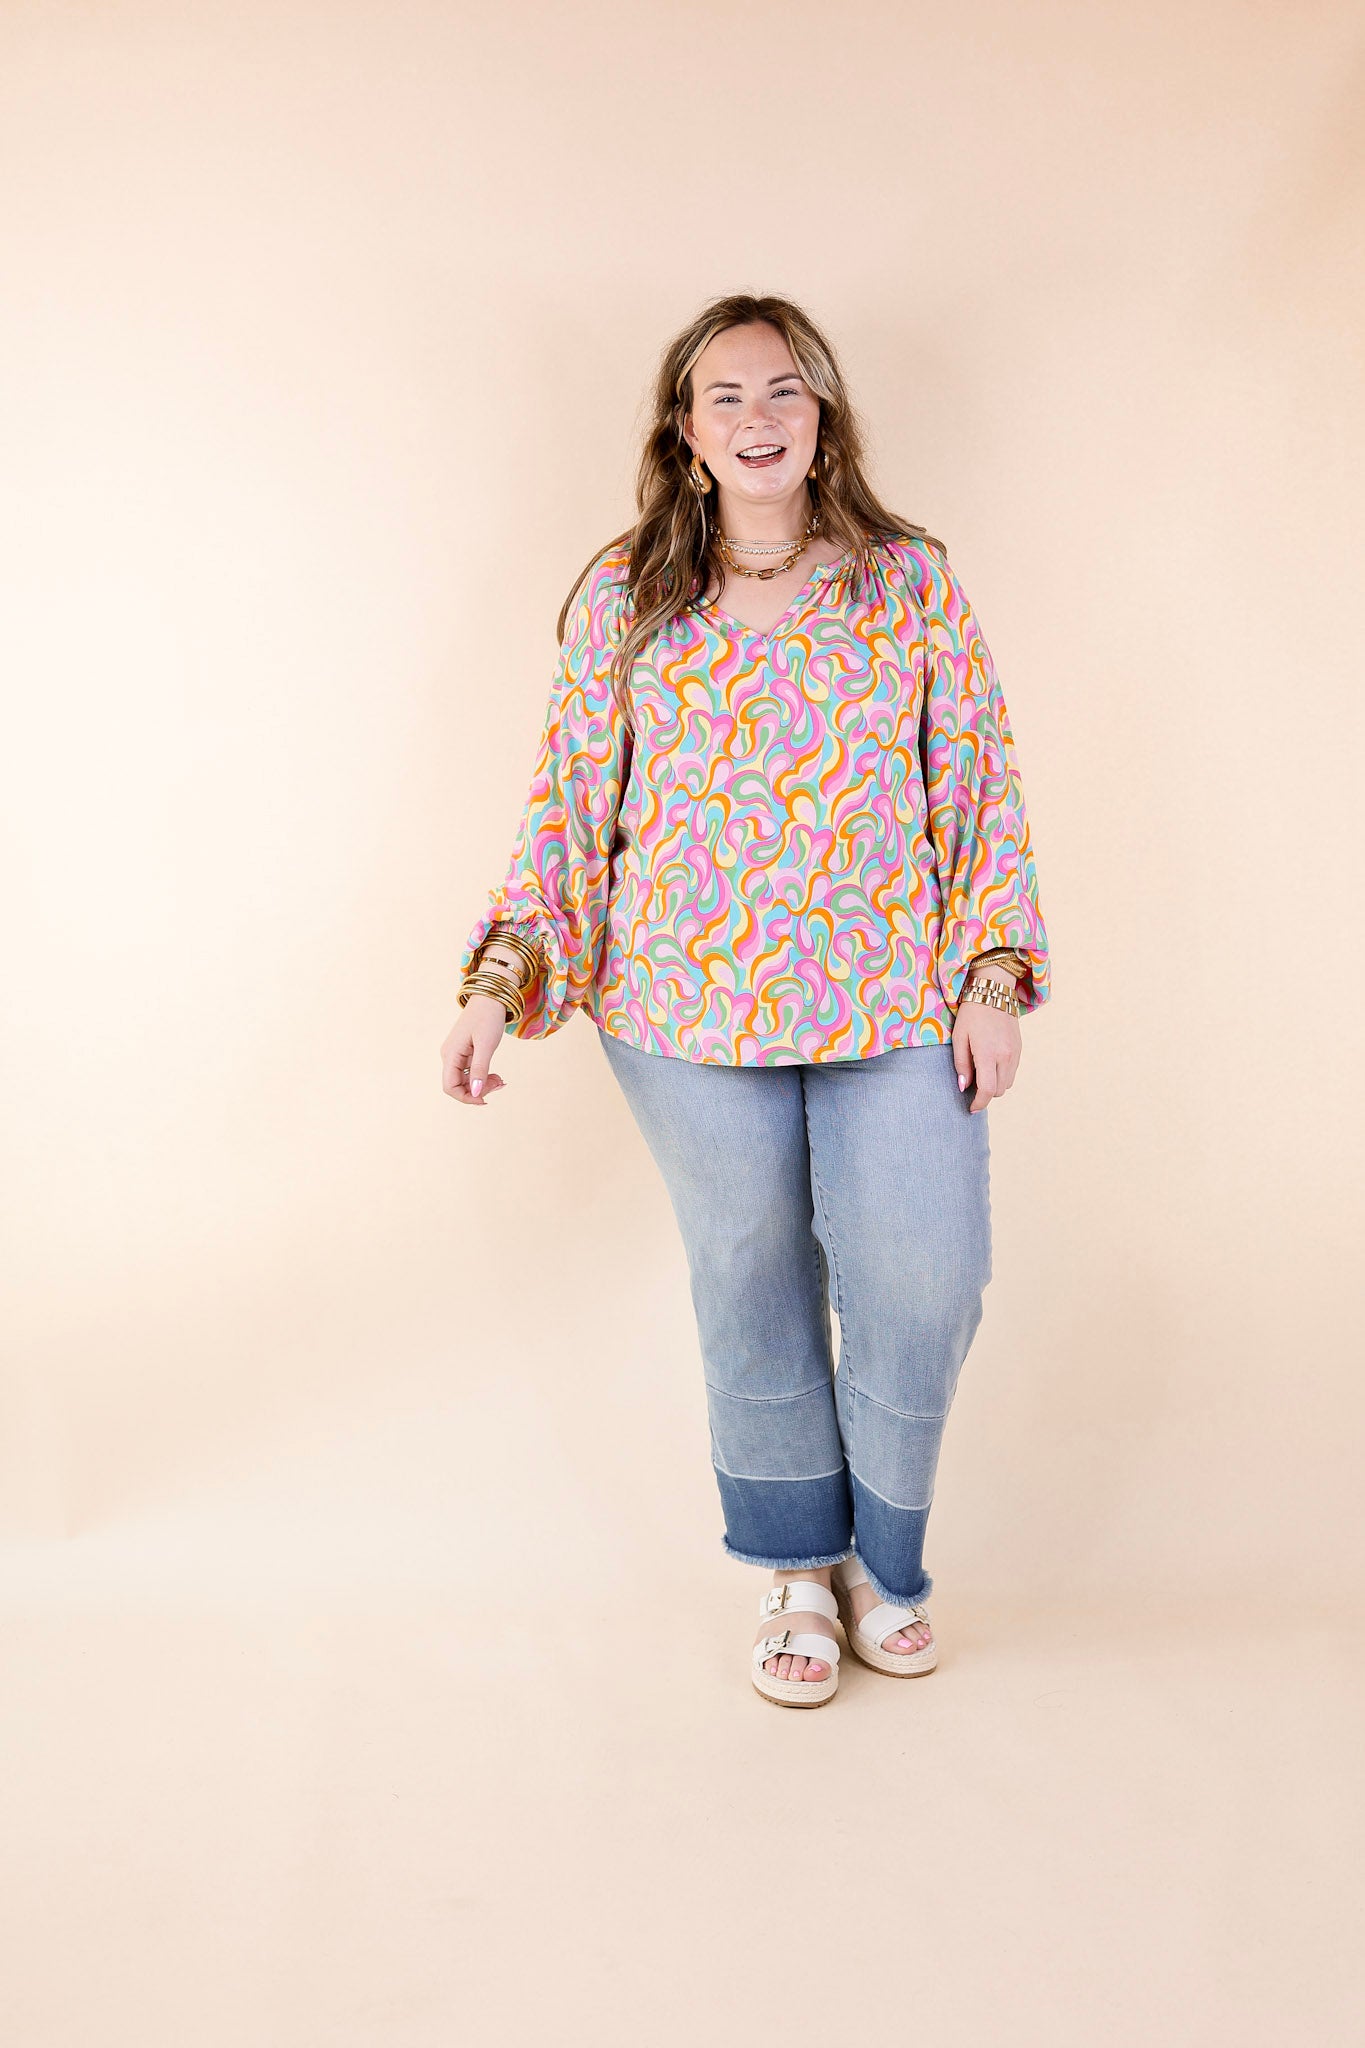 Follow Your Happiness Notched V Neck Psychedelic Top with Long Sleeves in Pink Mix - Giddy Up Glamour Boutique